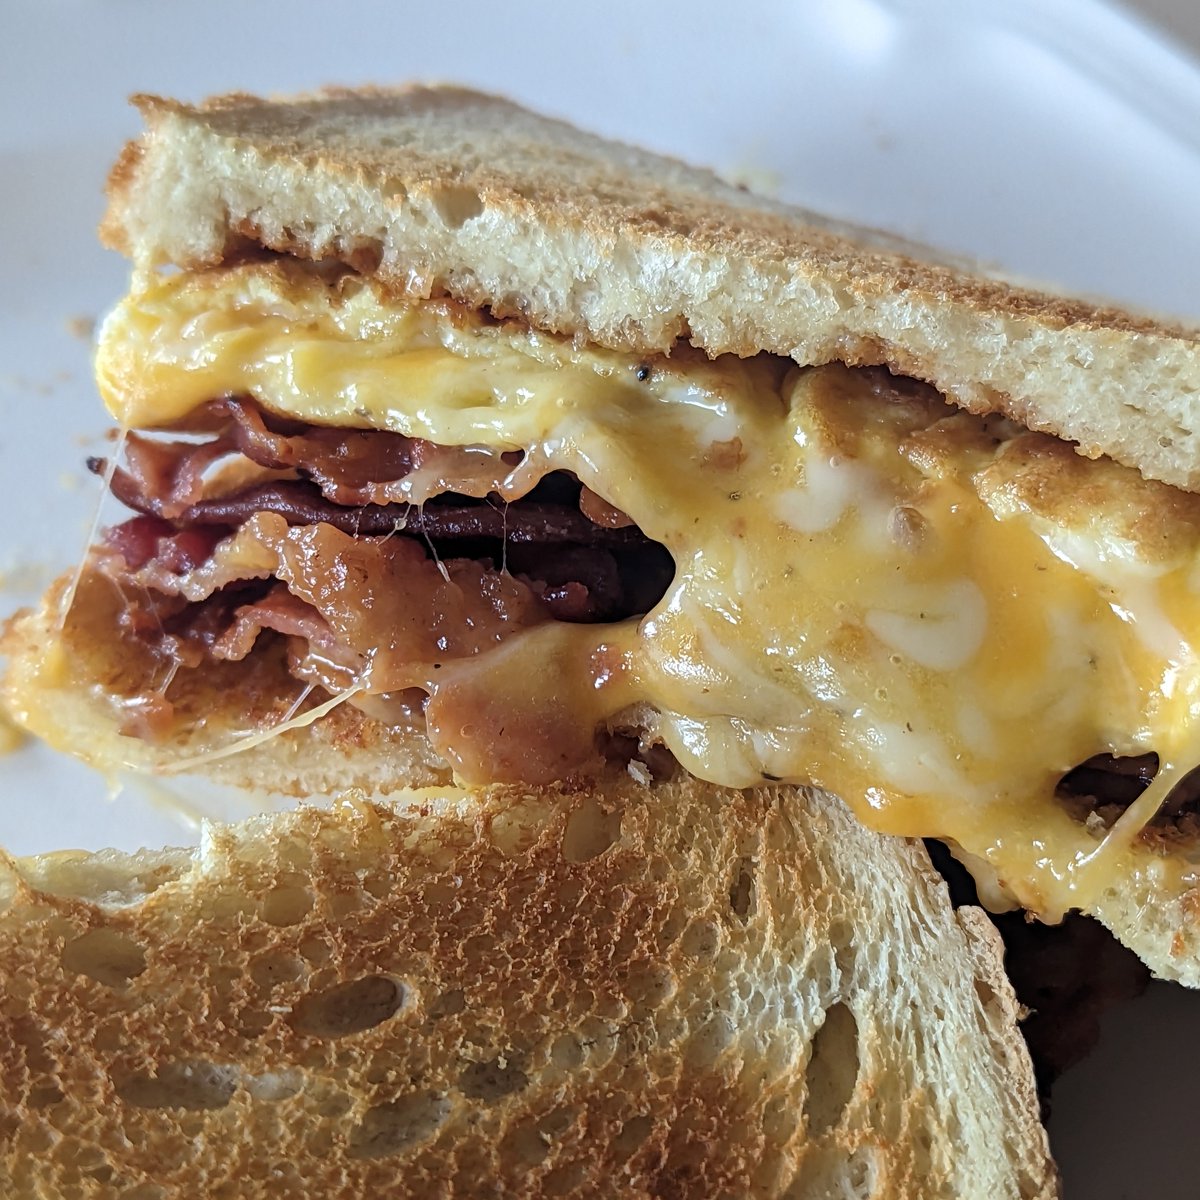 Another weekend another breakfast sandwich! One of these days I will make one for myself, in the meantime the kiddo loves them!

#breakfast #bacon #baconandeggs #baconsandwich #eggsandwich #breakfastsandwich #happykid #cheese #toastedsandwich #smokinghotdad #lovebacon